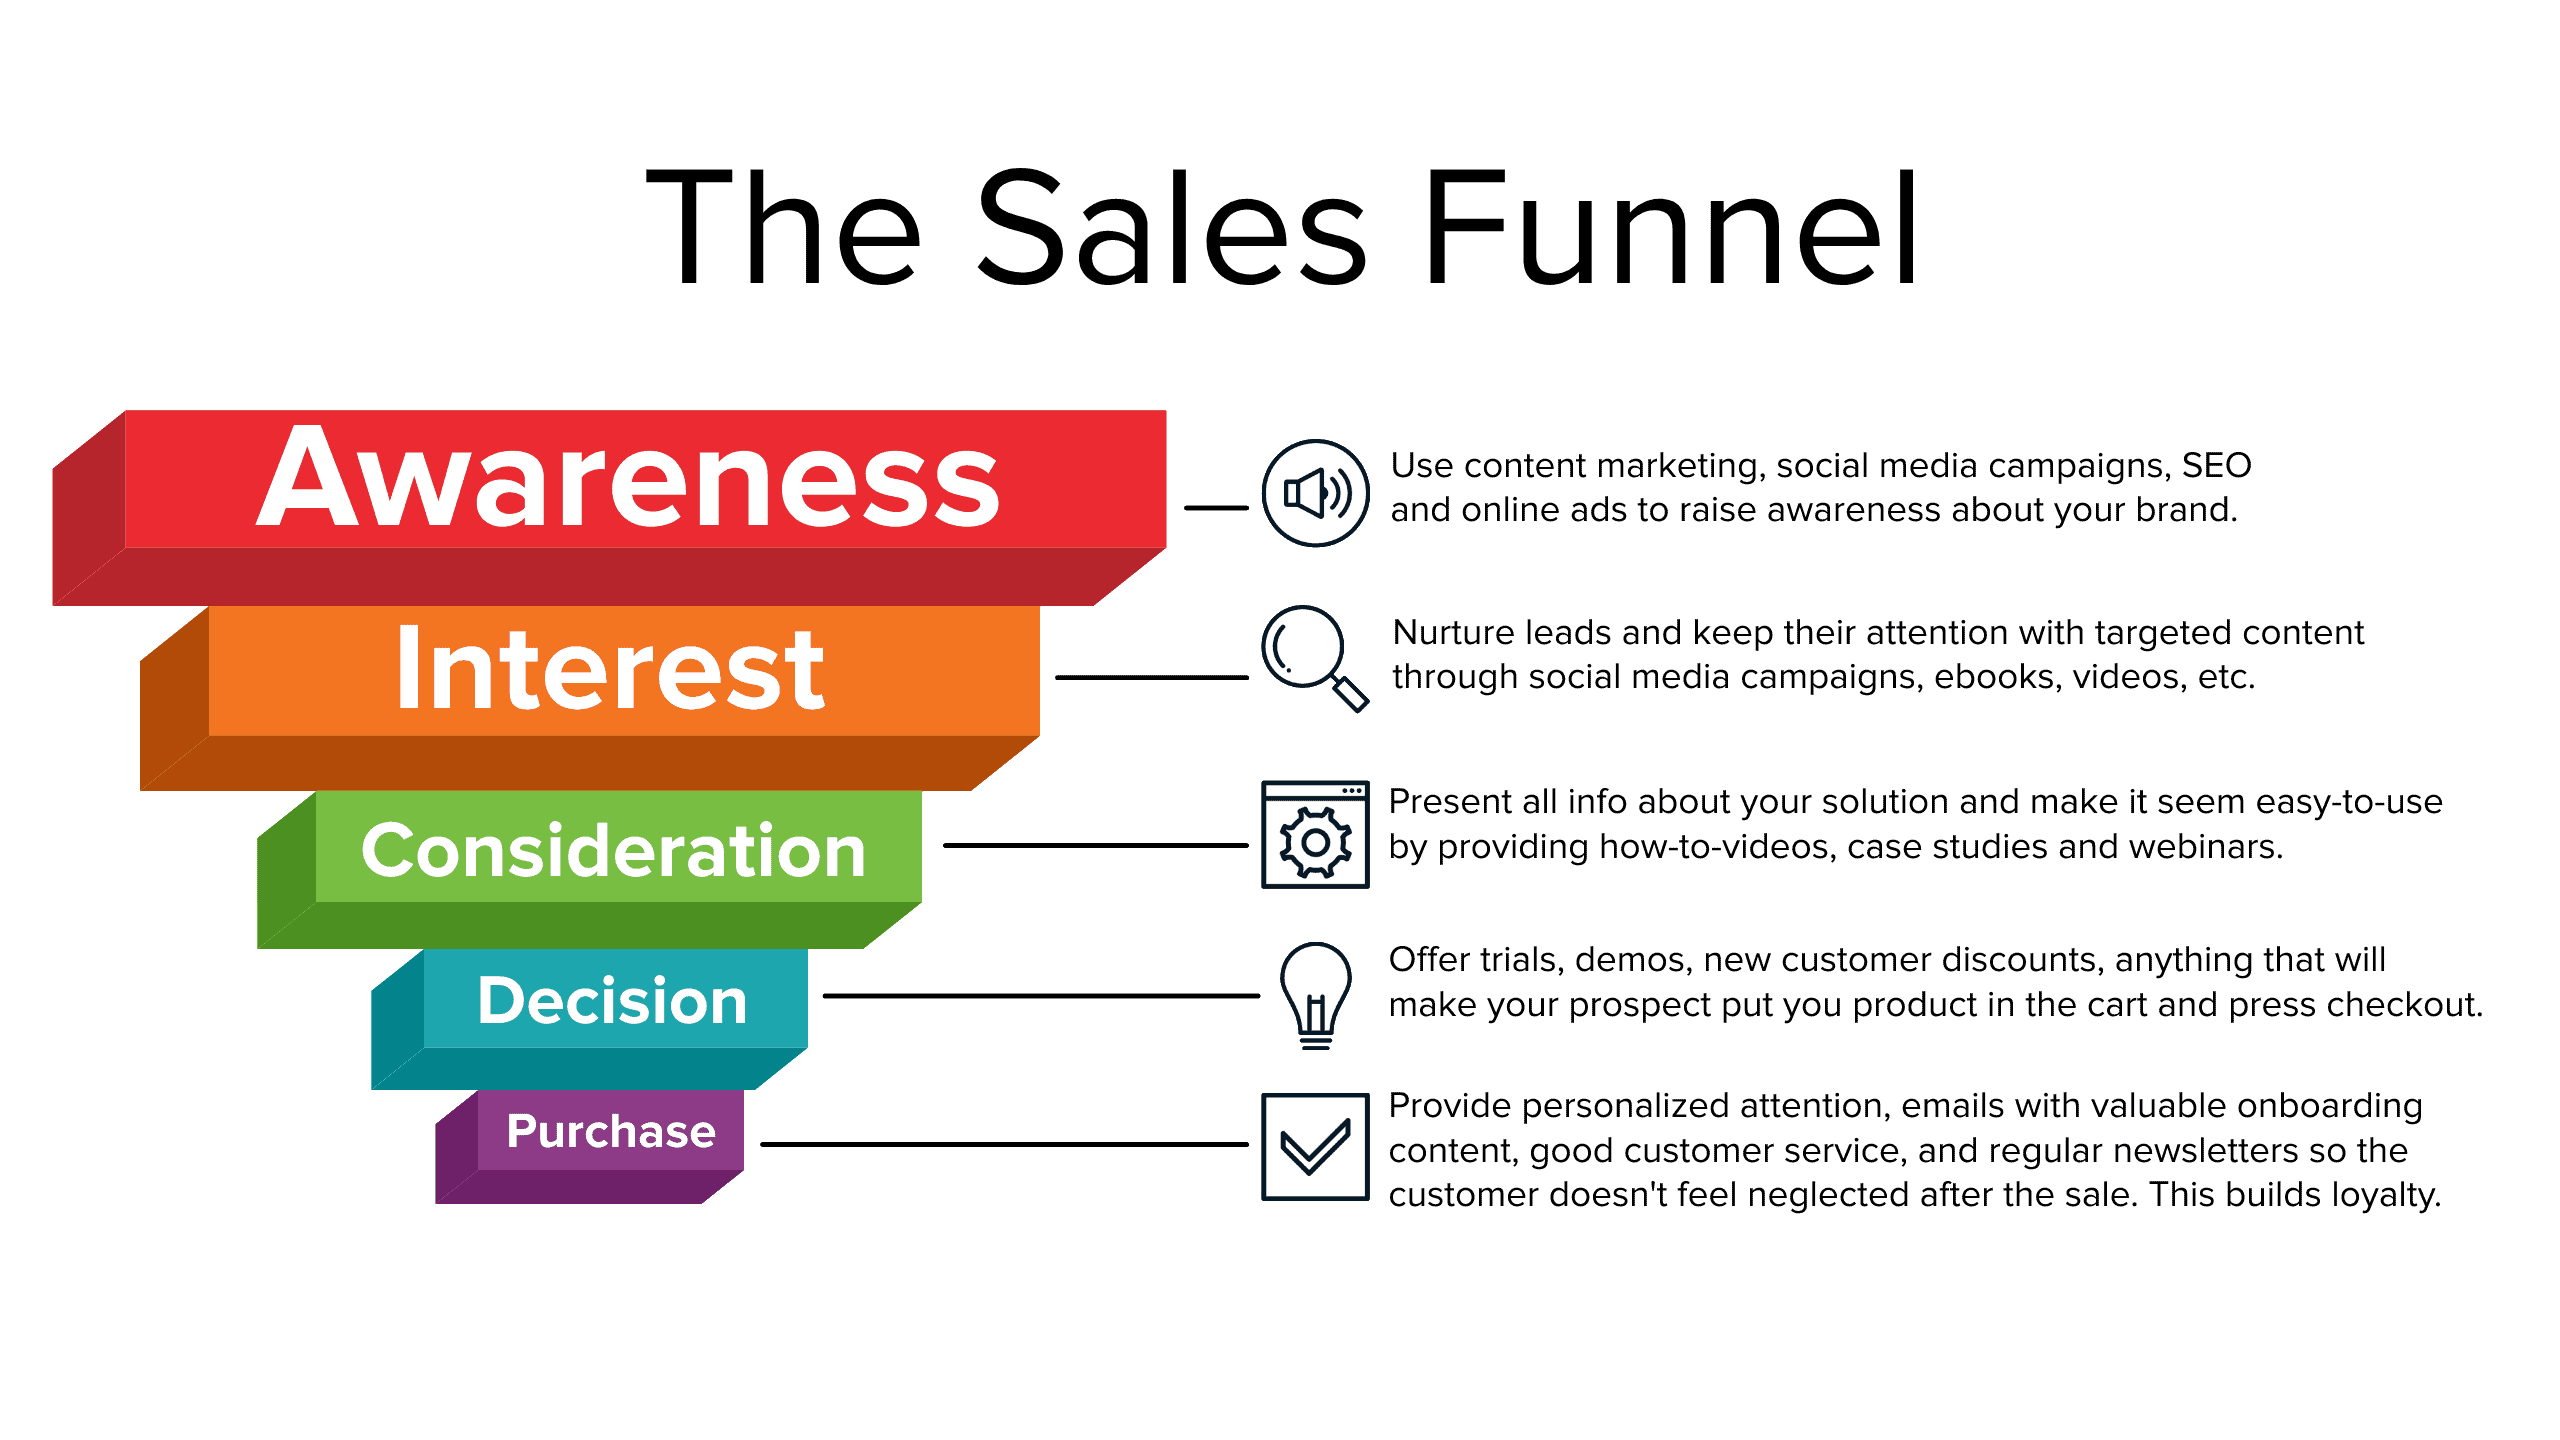 Typical sales funnel business model